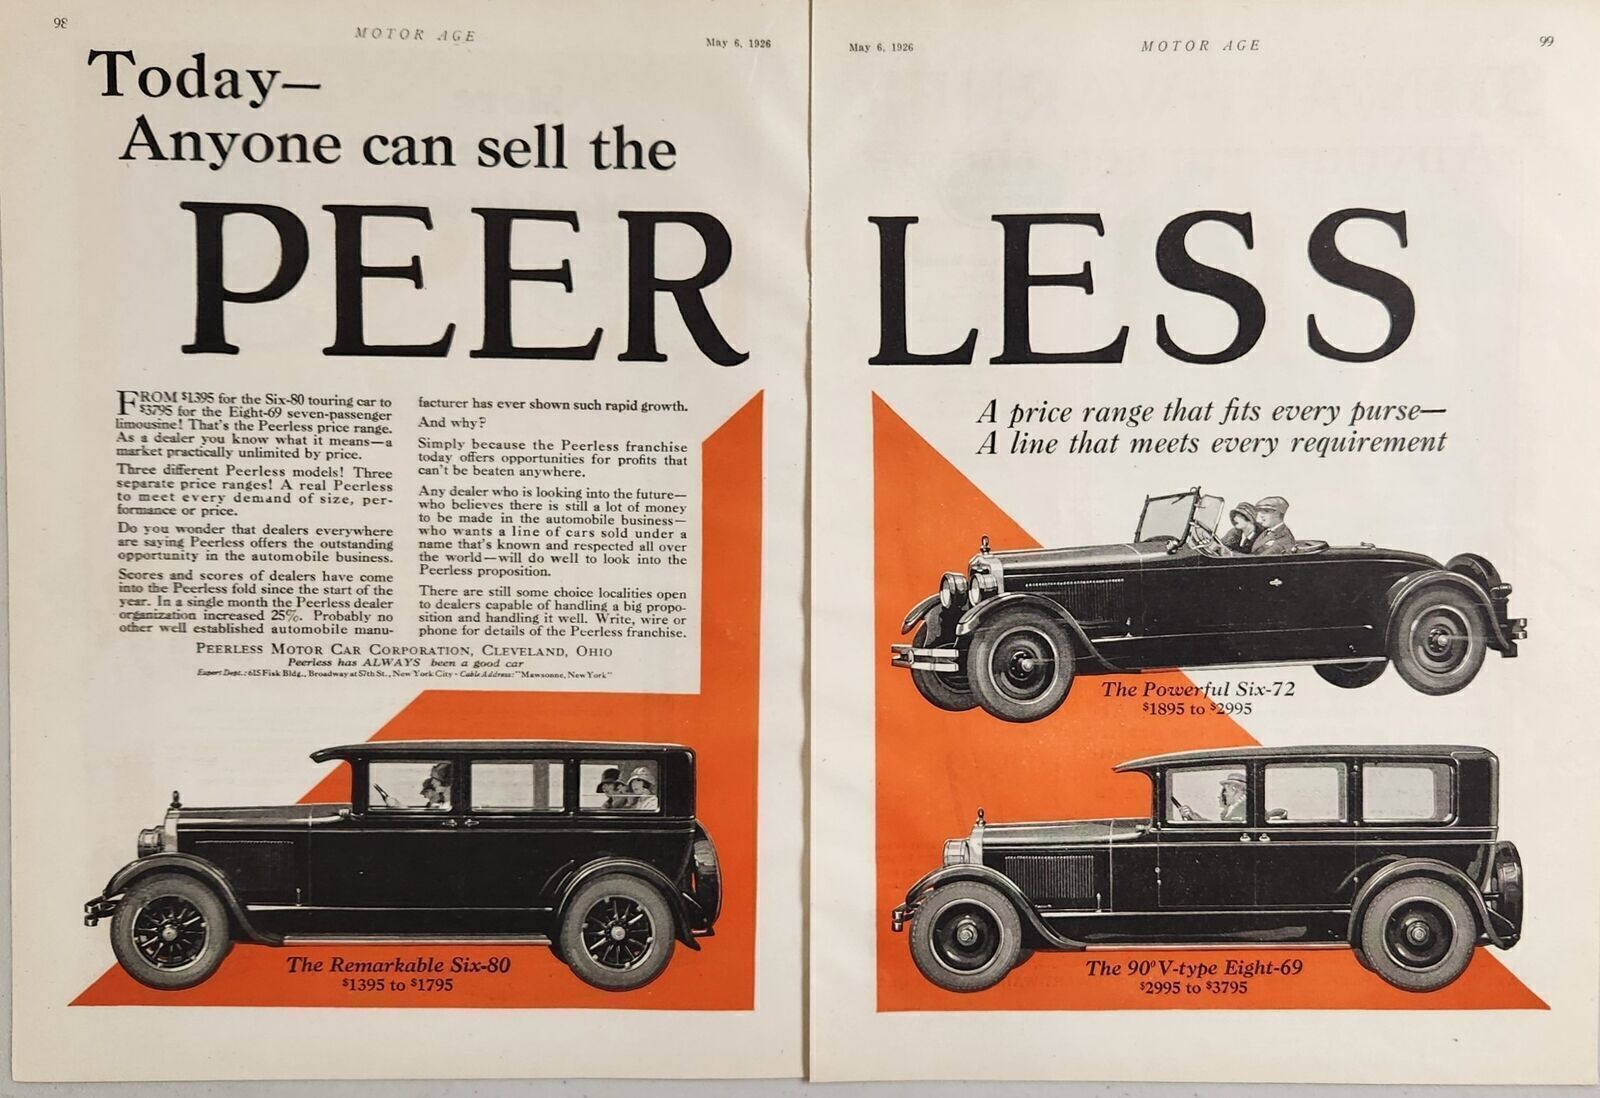 1926 Print Ad Peerless Motor Cars 3 Models Shown Made in Cleveland,Ohio